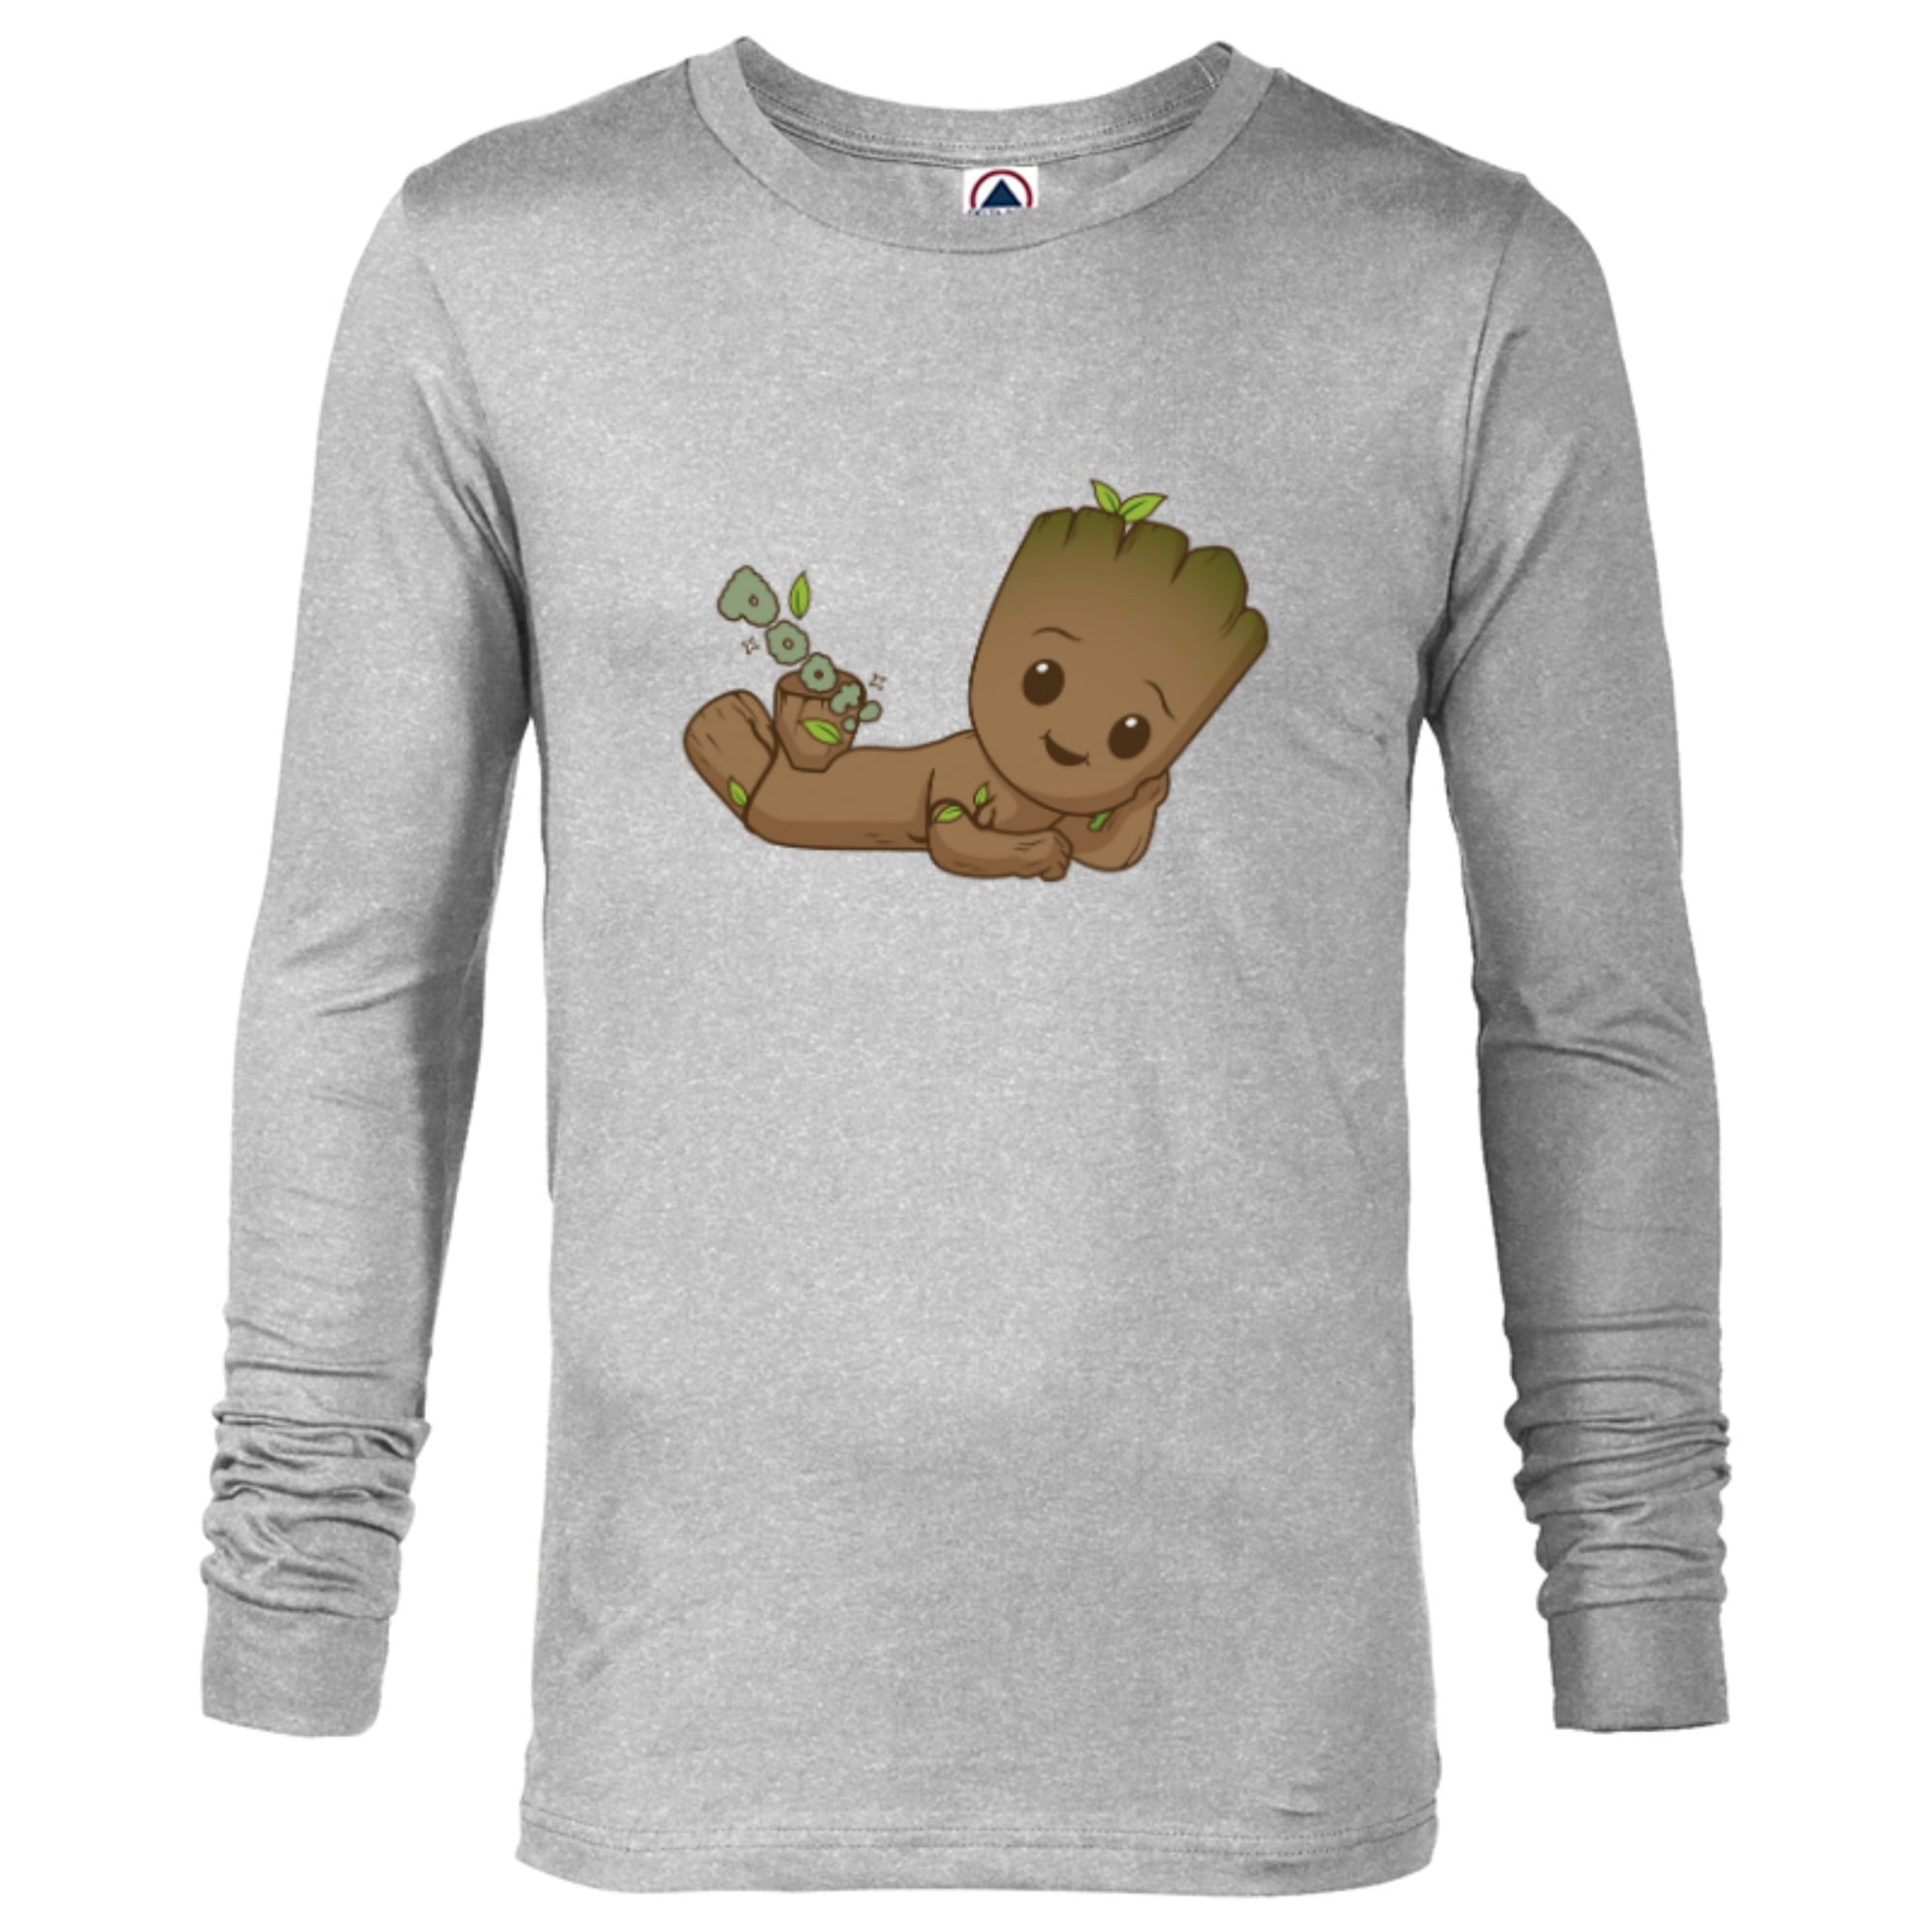 Customized-Athletic Heather - Long Groot - T-Shirt Poot! I Men for Studios Am Sleeve Marvel